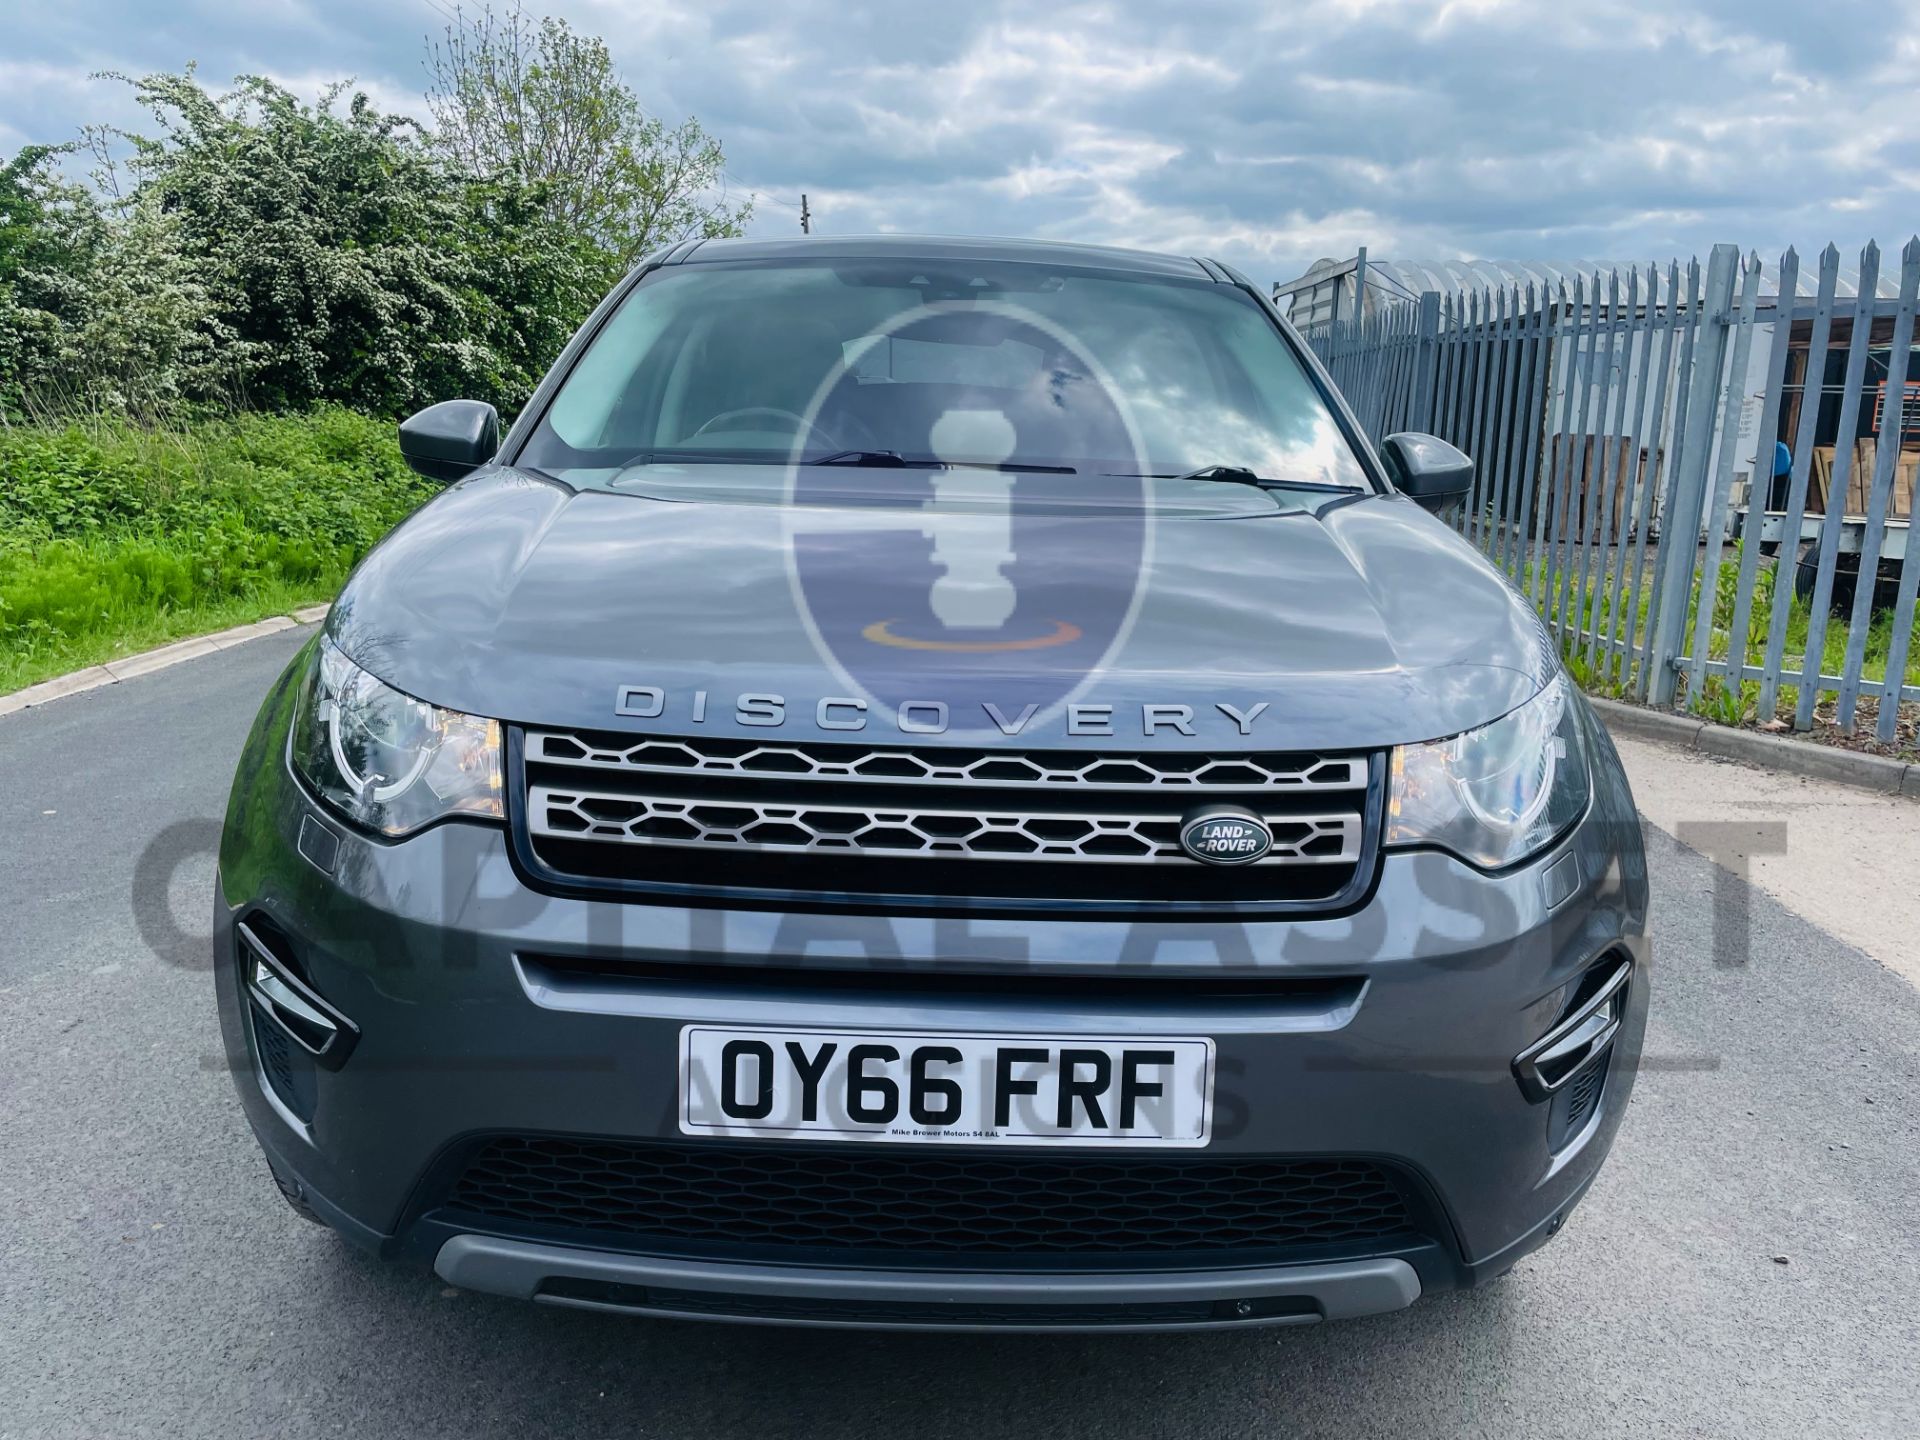 (ON SALE) LAND ROVER DISCOVERY SPORT *SE TECH* SUV (2017 - EURO 6) 2.0 TD4 - AUTO STOP/START(NO VAT) - Image 4 of 51